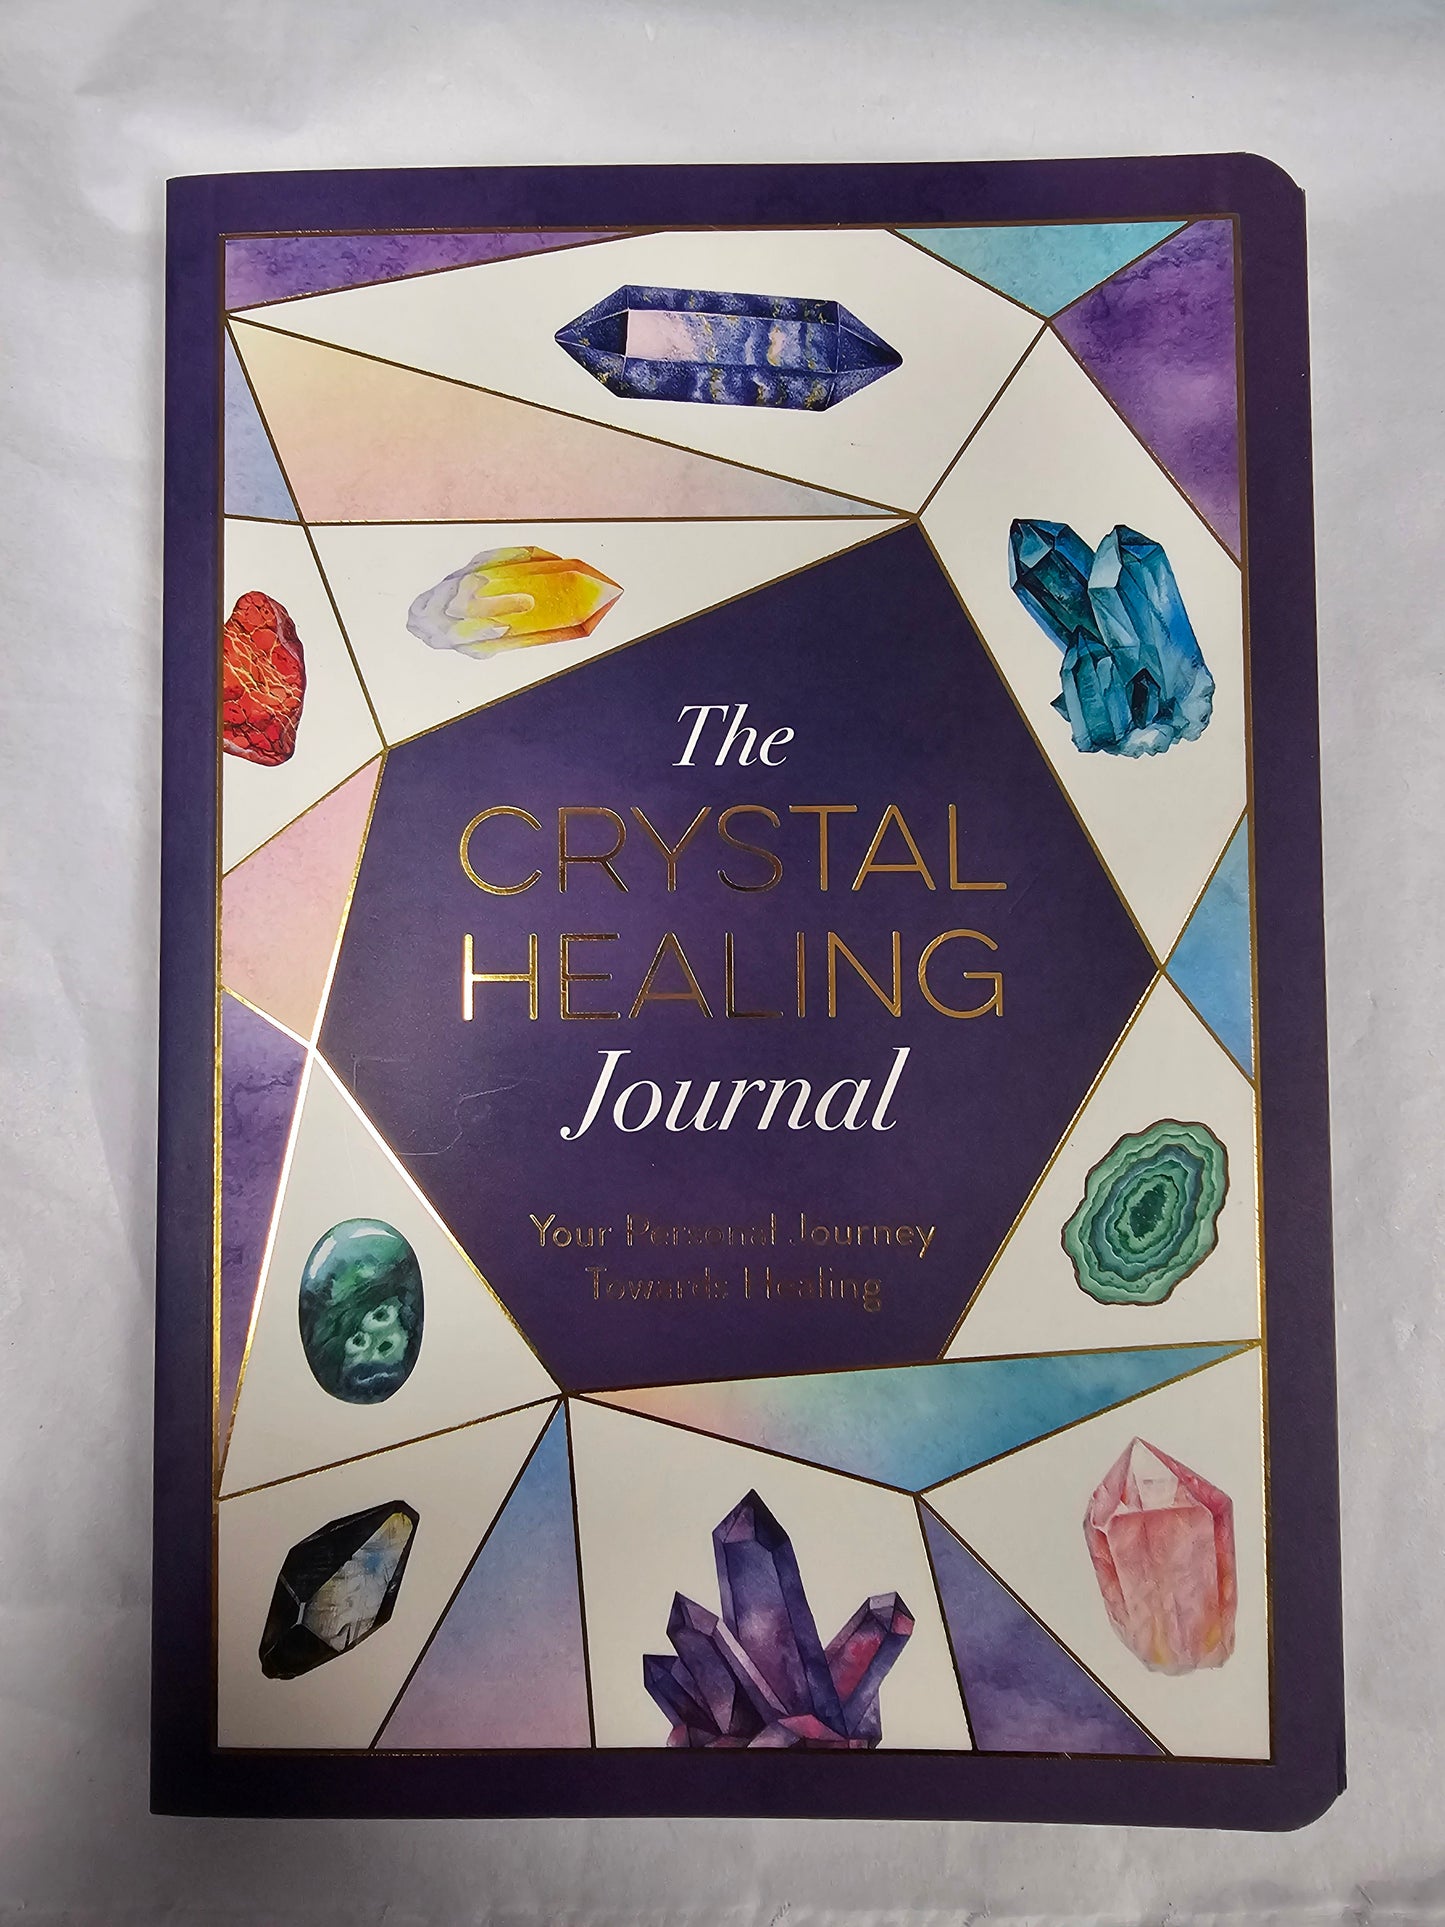 The Crystal Healing Journal book